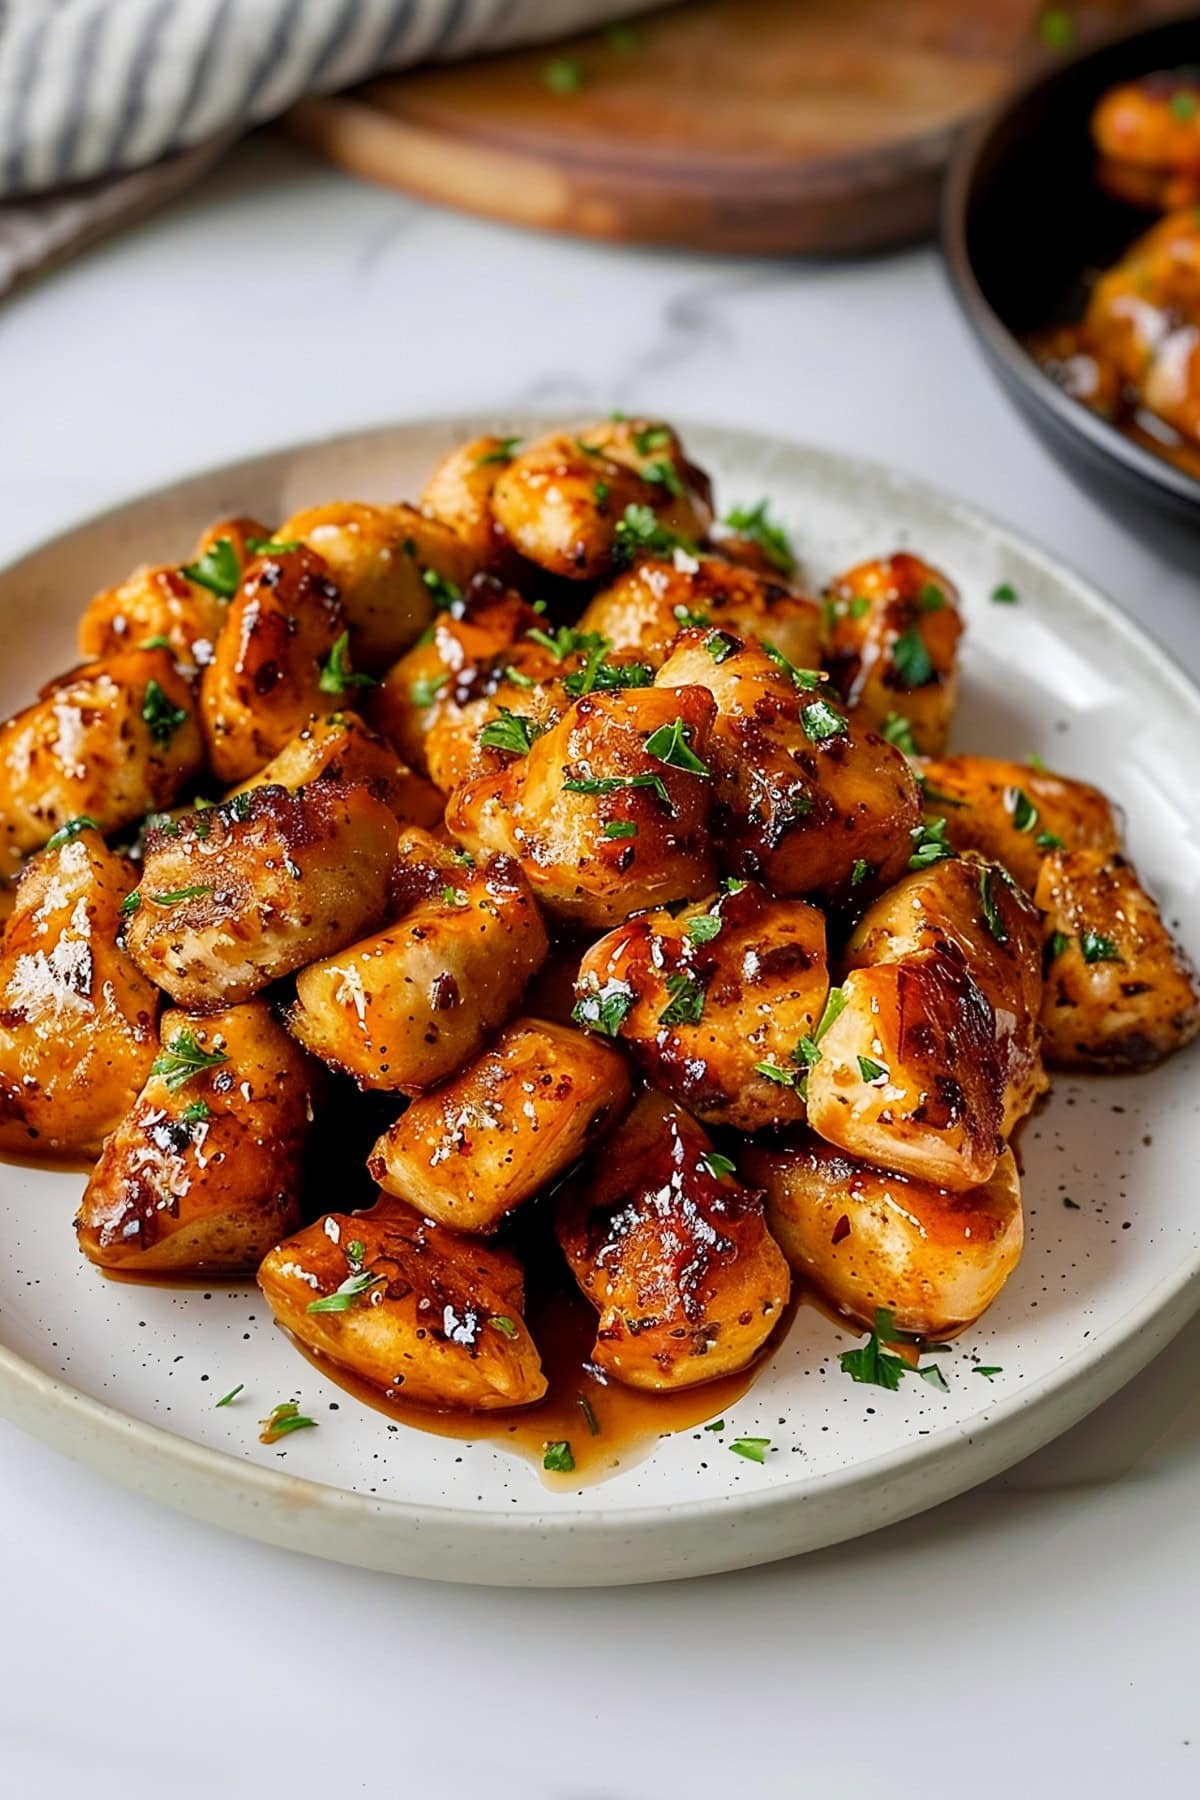 Tender, juicy, bite size pieces of chicken breast coated in a rich garlic and butter sauce